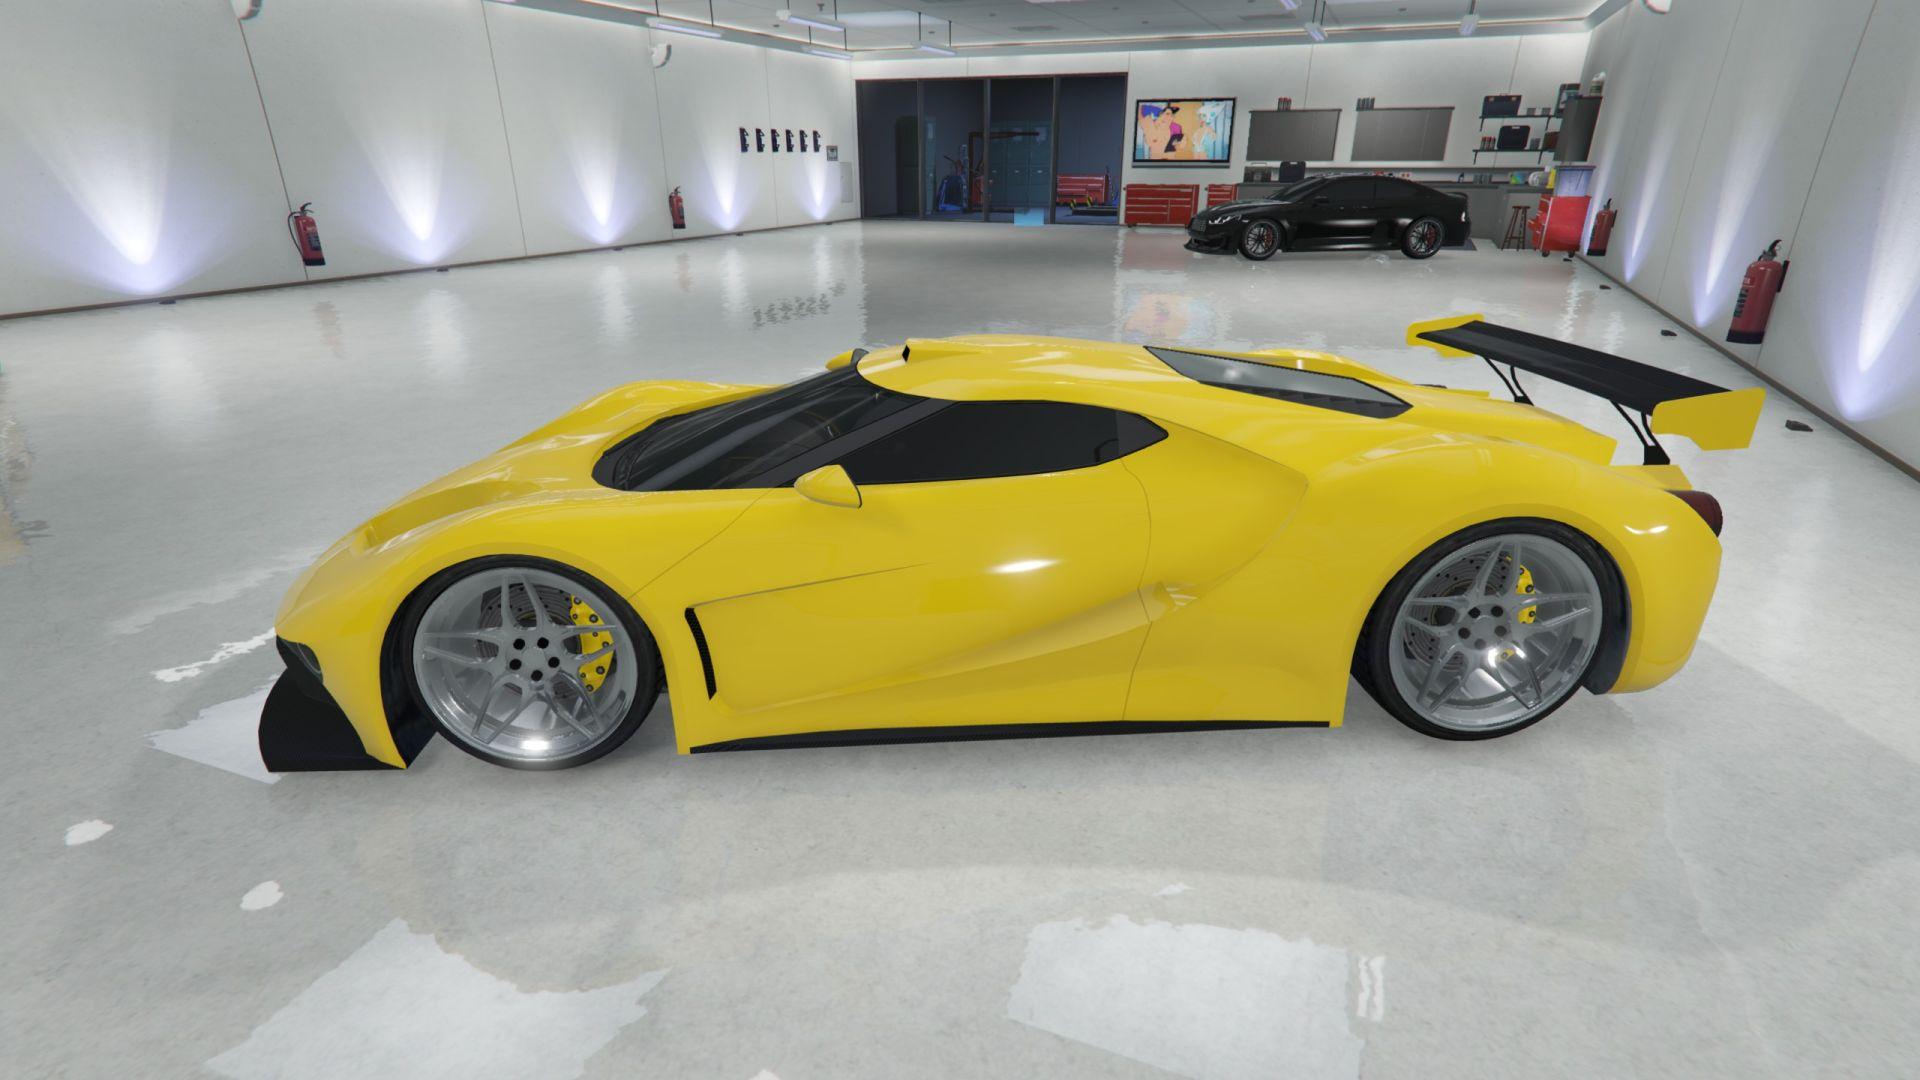 Vapid FMJ | GTA 5 Online Vehicle Stats, Price, How To Get